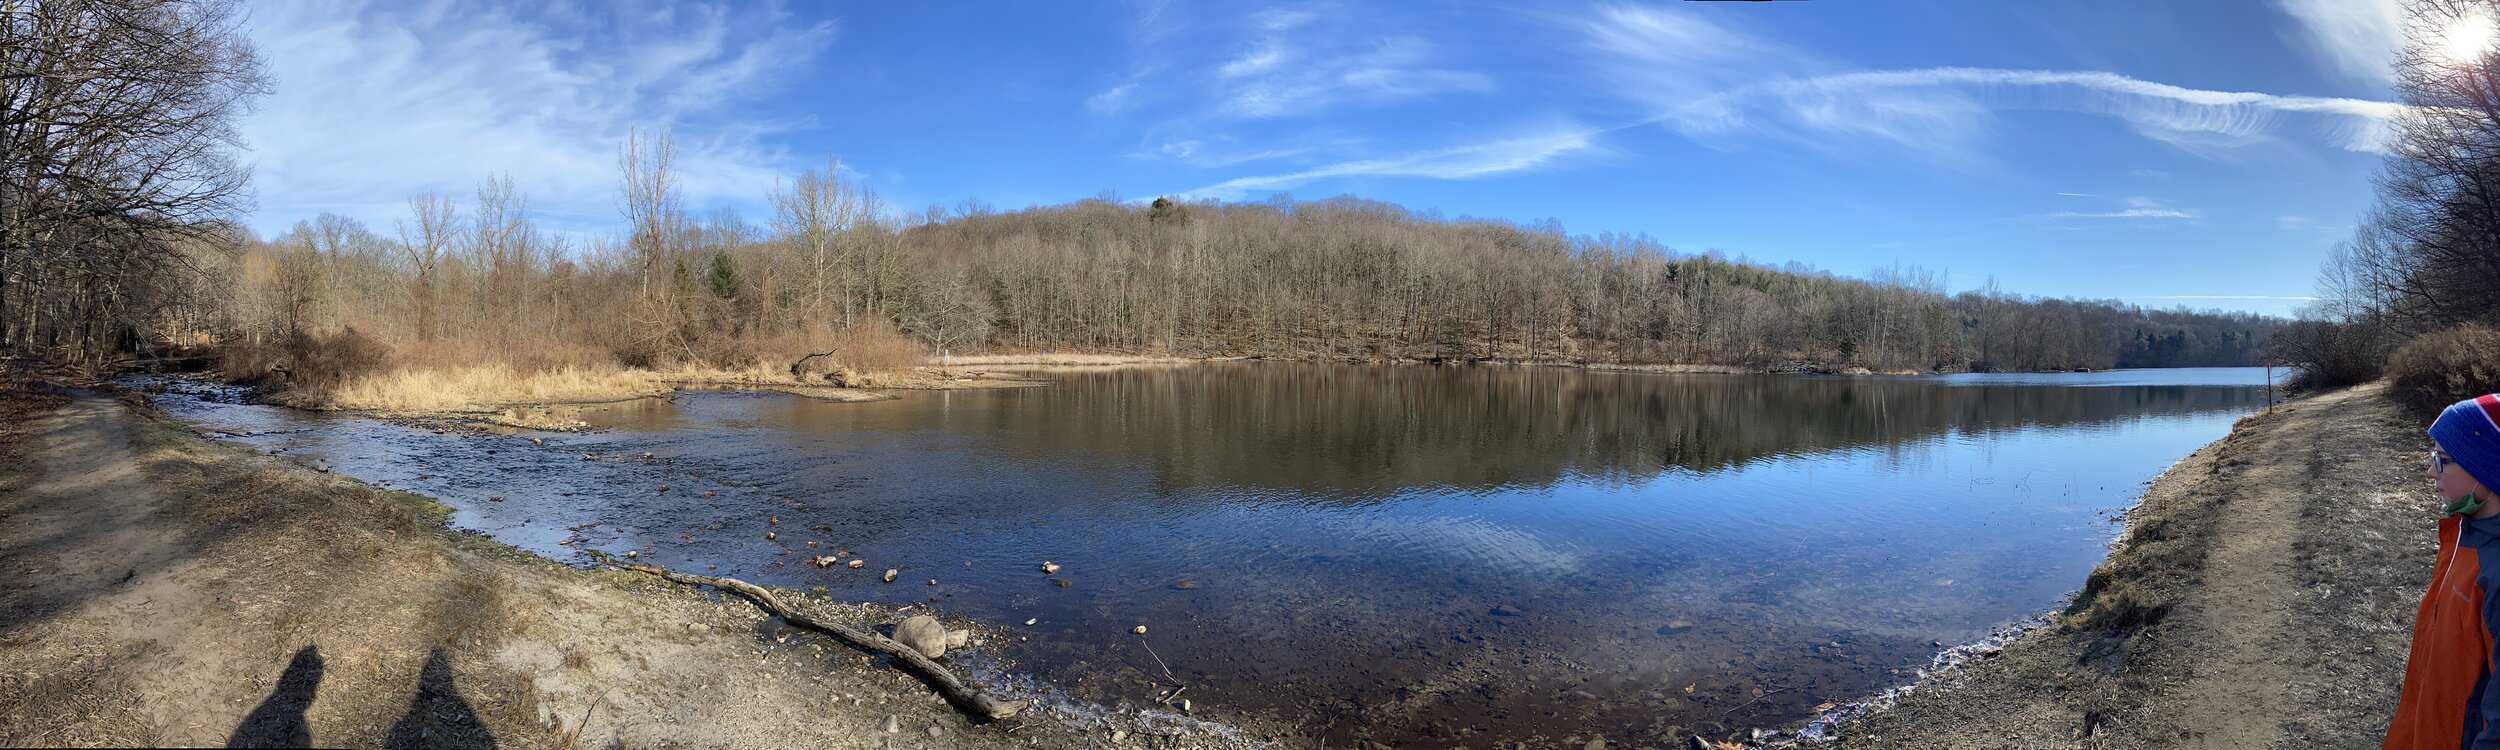 10 Family Friendly Hiking Spots in Fairfield County, Connecticut